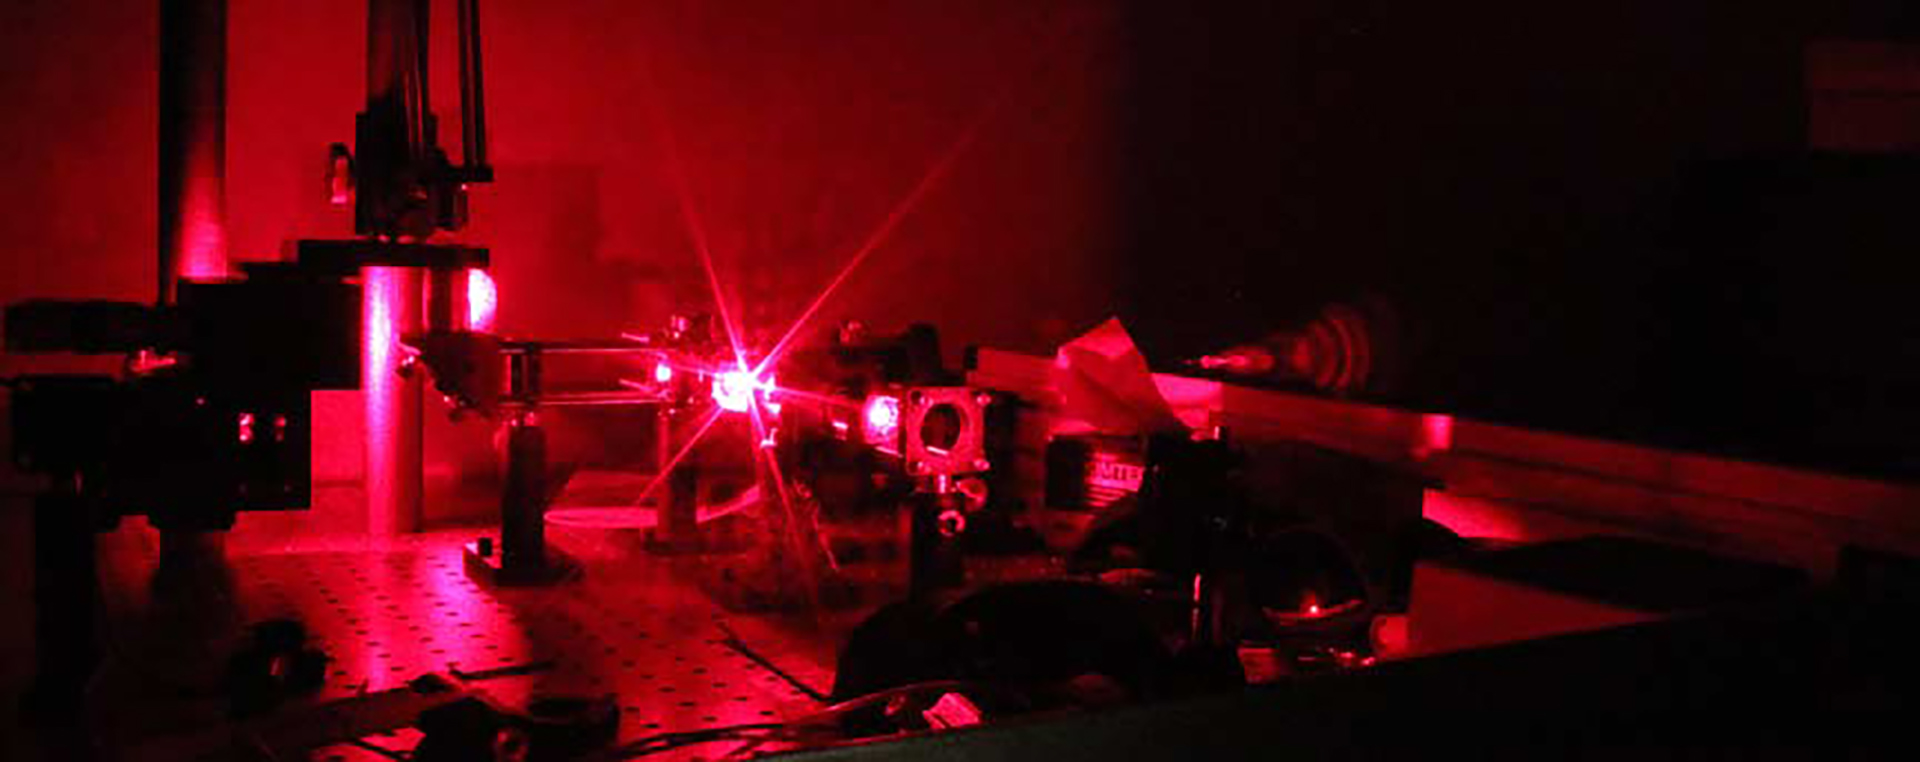 red laser glowing very brightly in equipment that is running experiment; physics